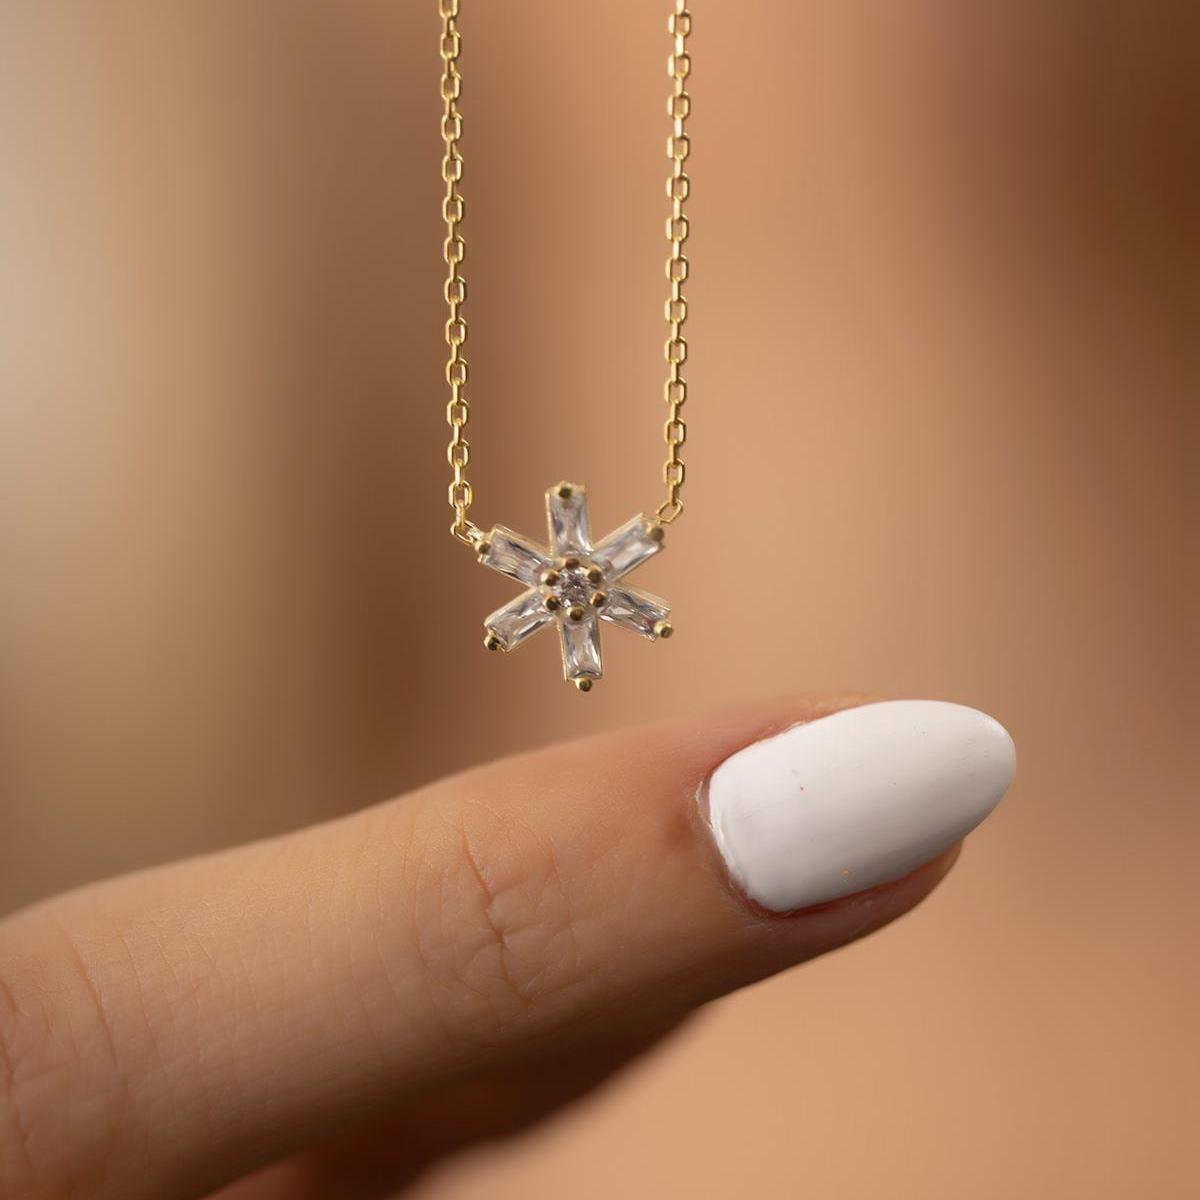 Star Sign Necklace • Star Necklace Silver • Star Necklace Choker - Trending Silver Gifts